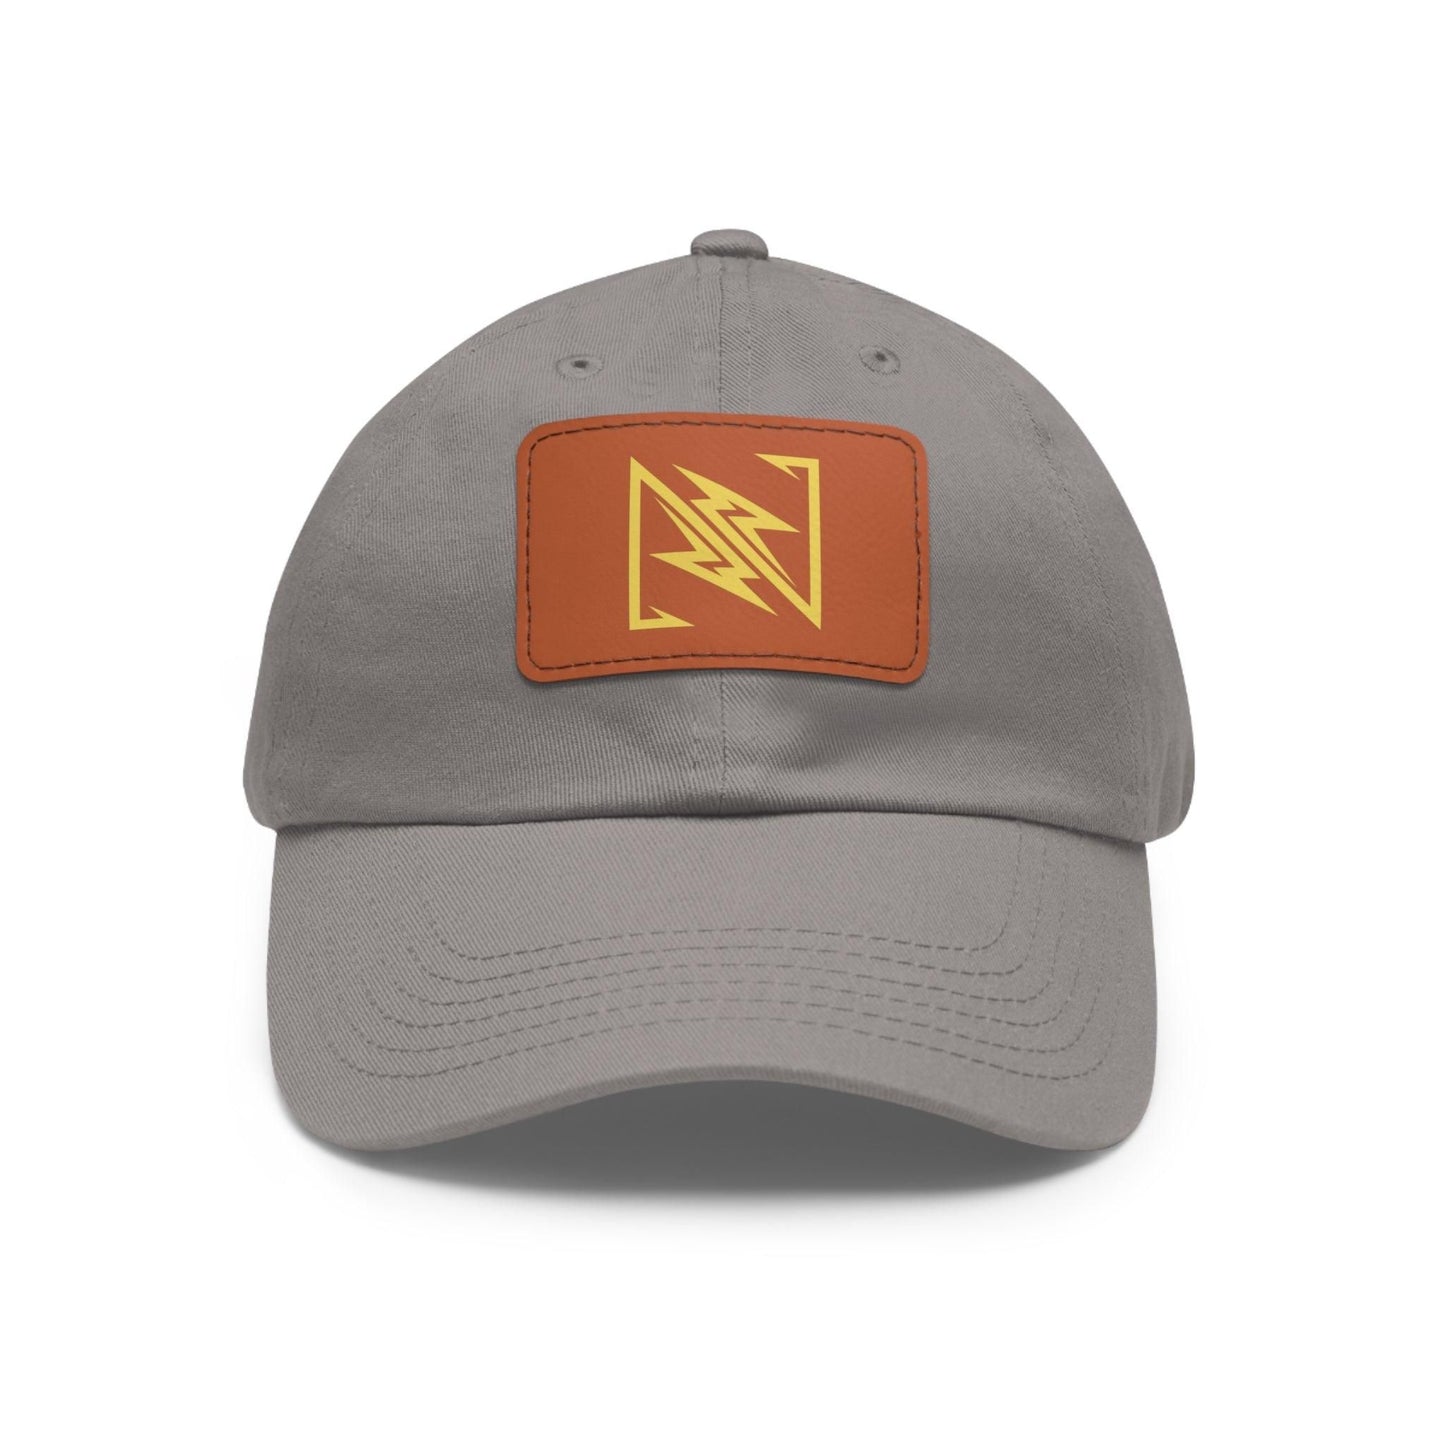 NX Vogue Premium Baseball Hat with Leather Patch Cap Grey / Light Brown patch Rectangle One size